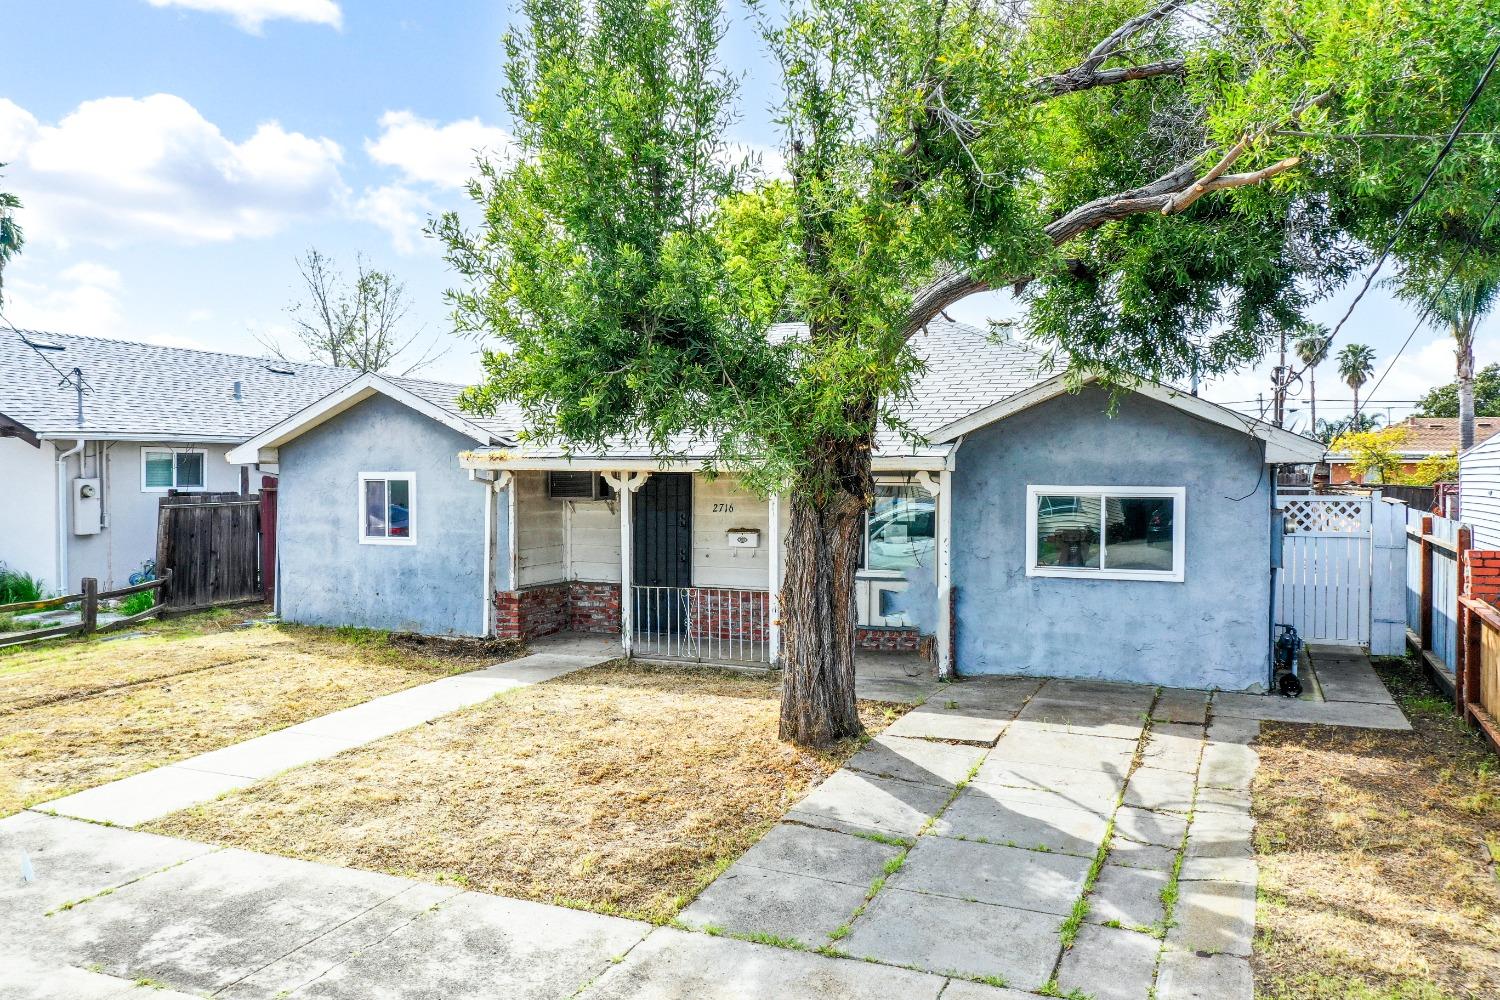 Photo of 2716 Bautista St in Antioch, CA